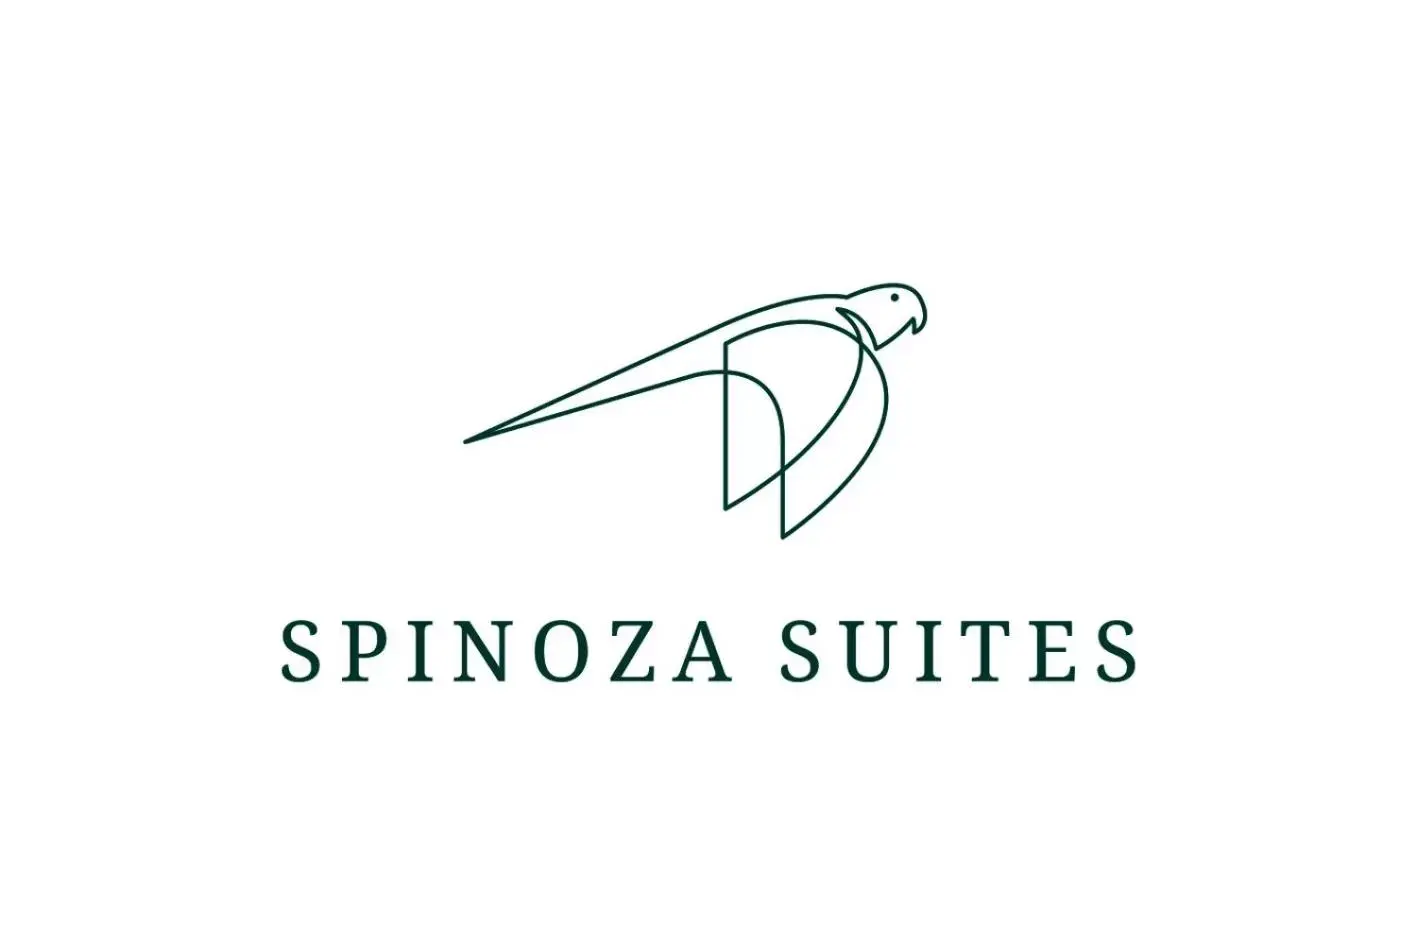 Property logo or sign, Property Logo/Sign in Spinoza Suites